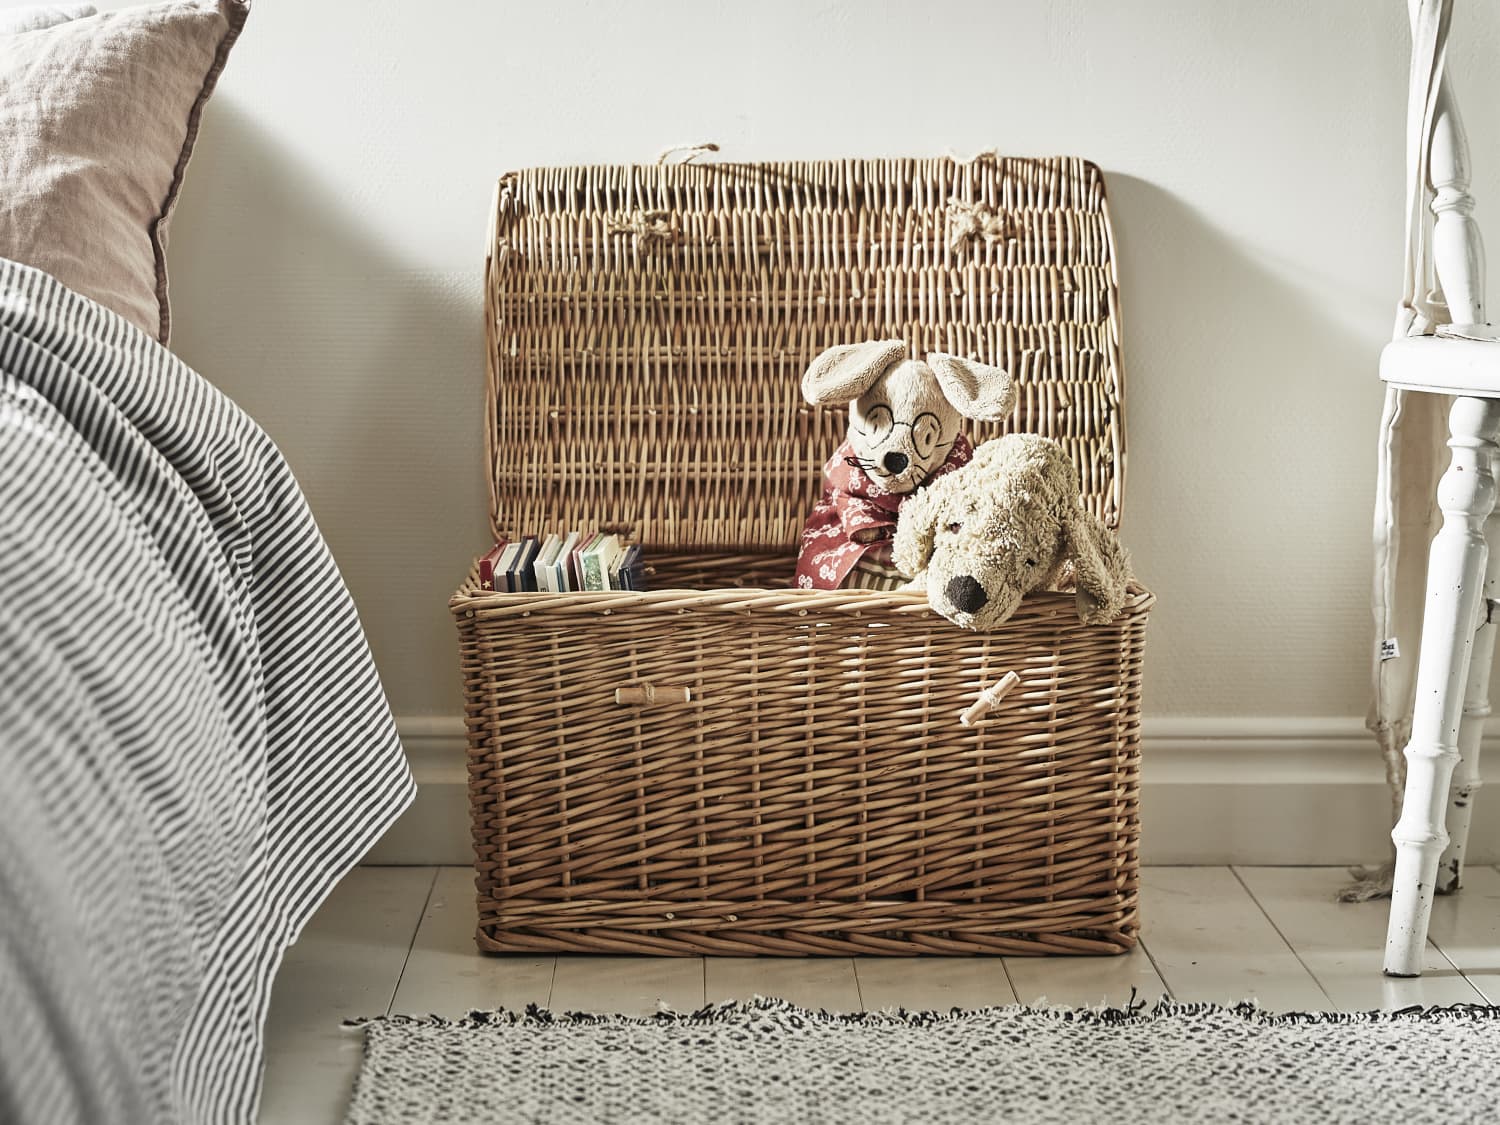 baby covered with pink blanket in brown woven basket with brown